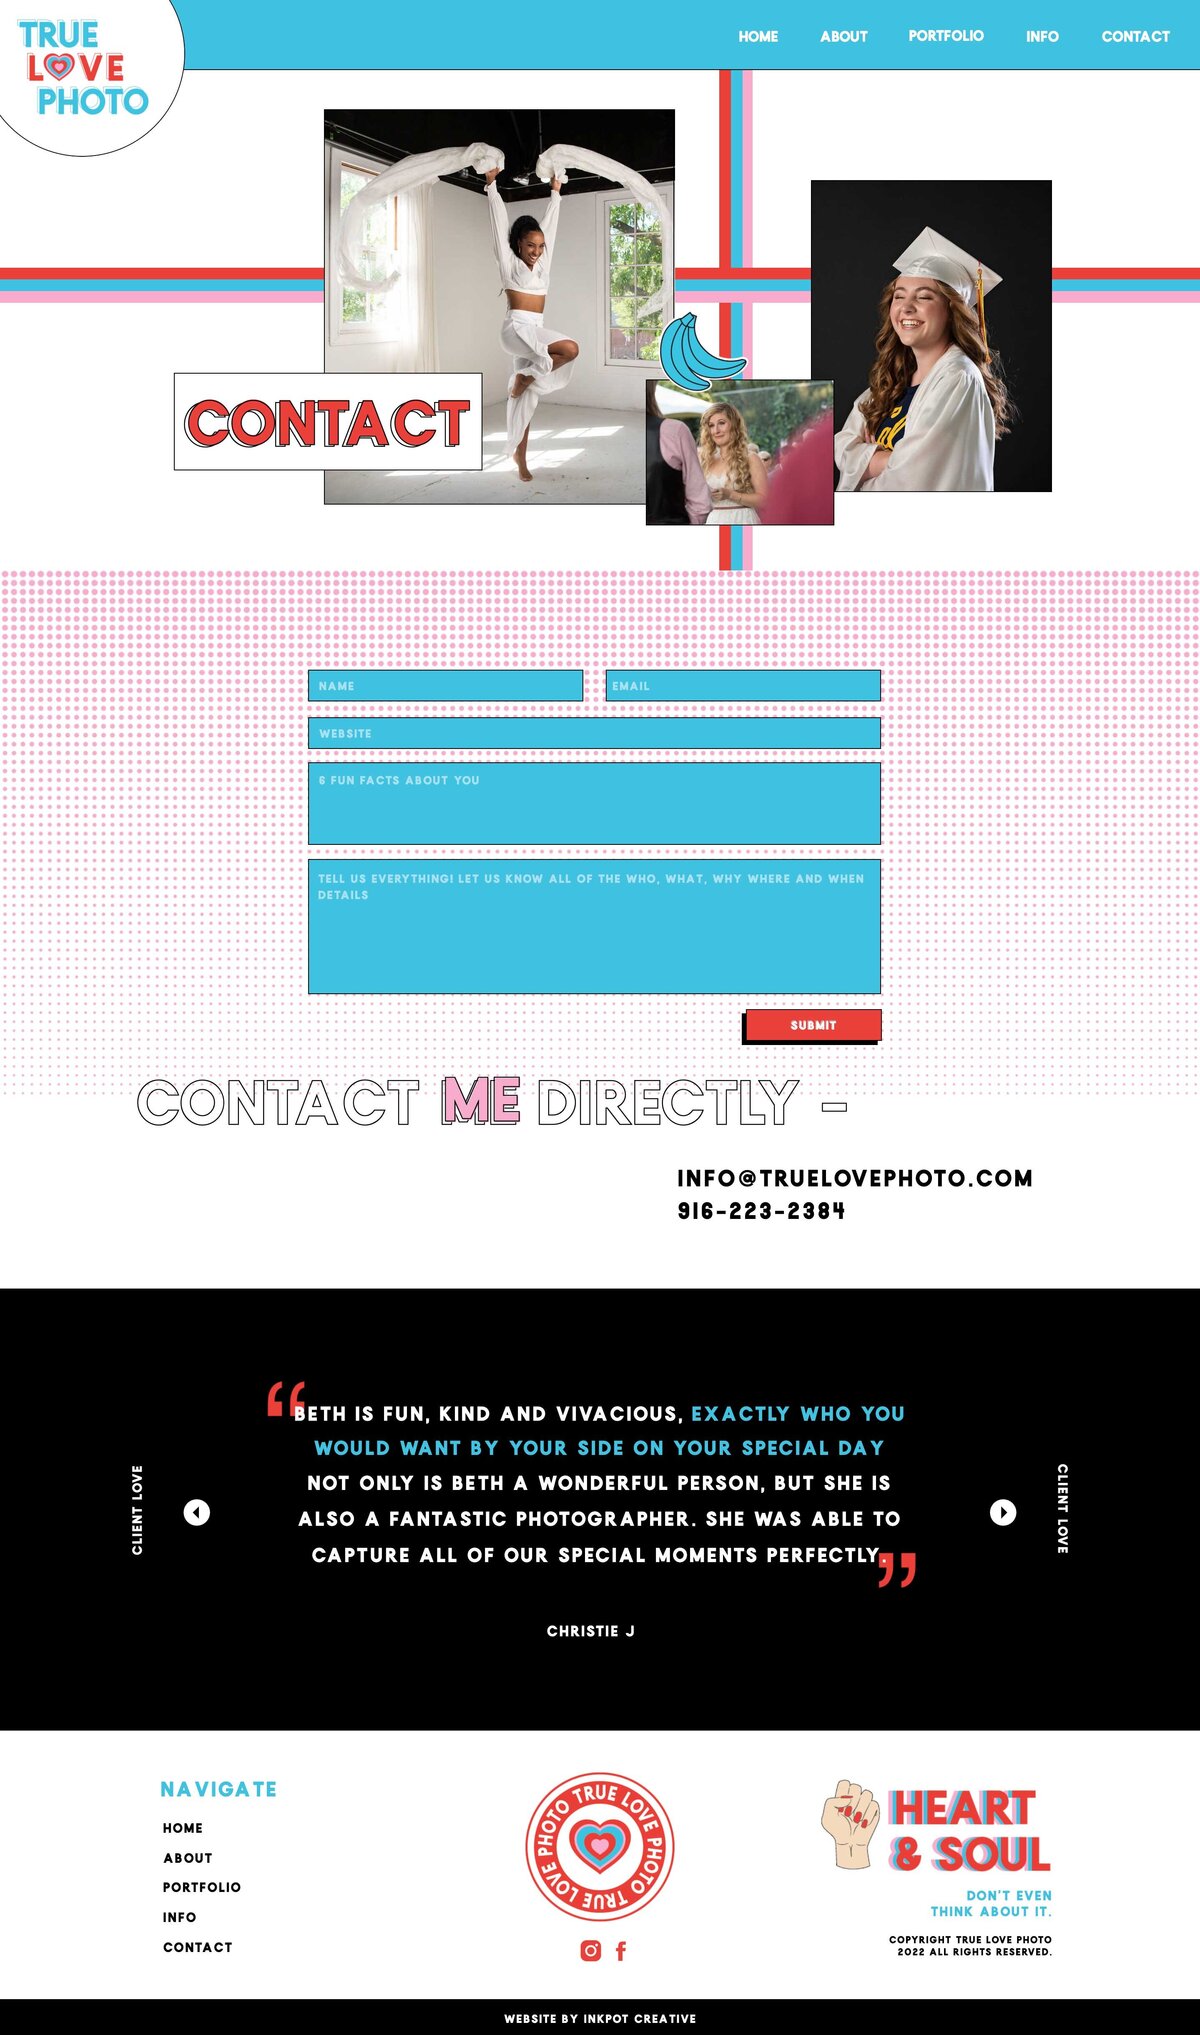 screenshot of full contact page